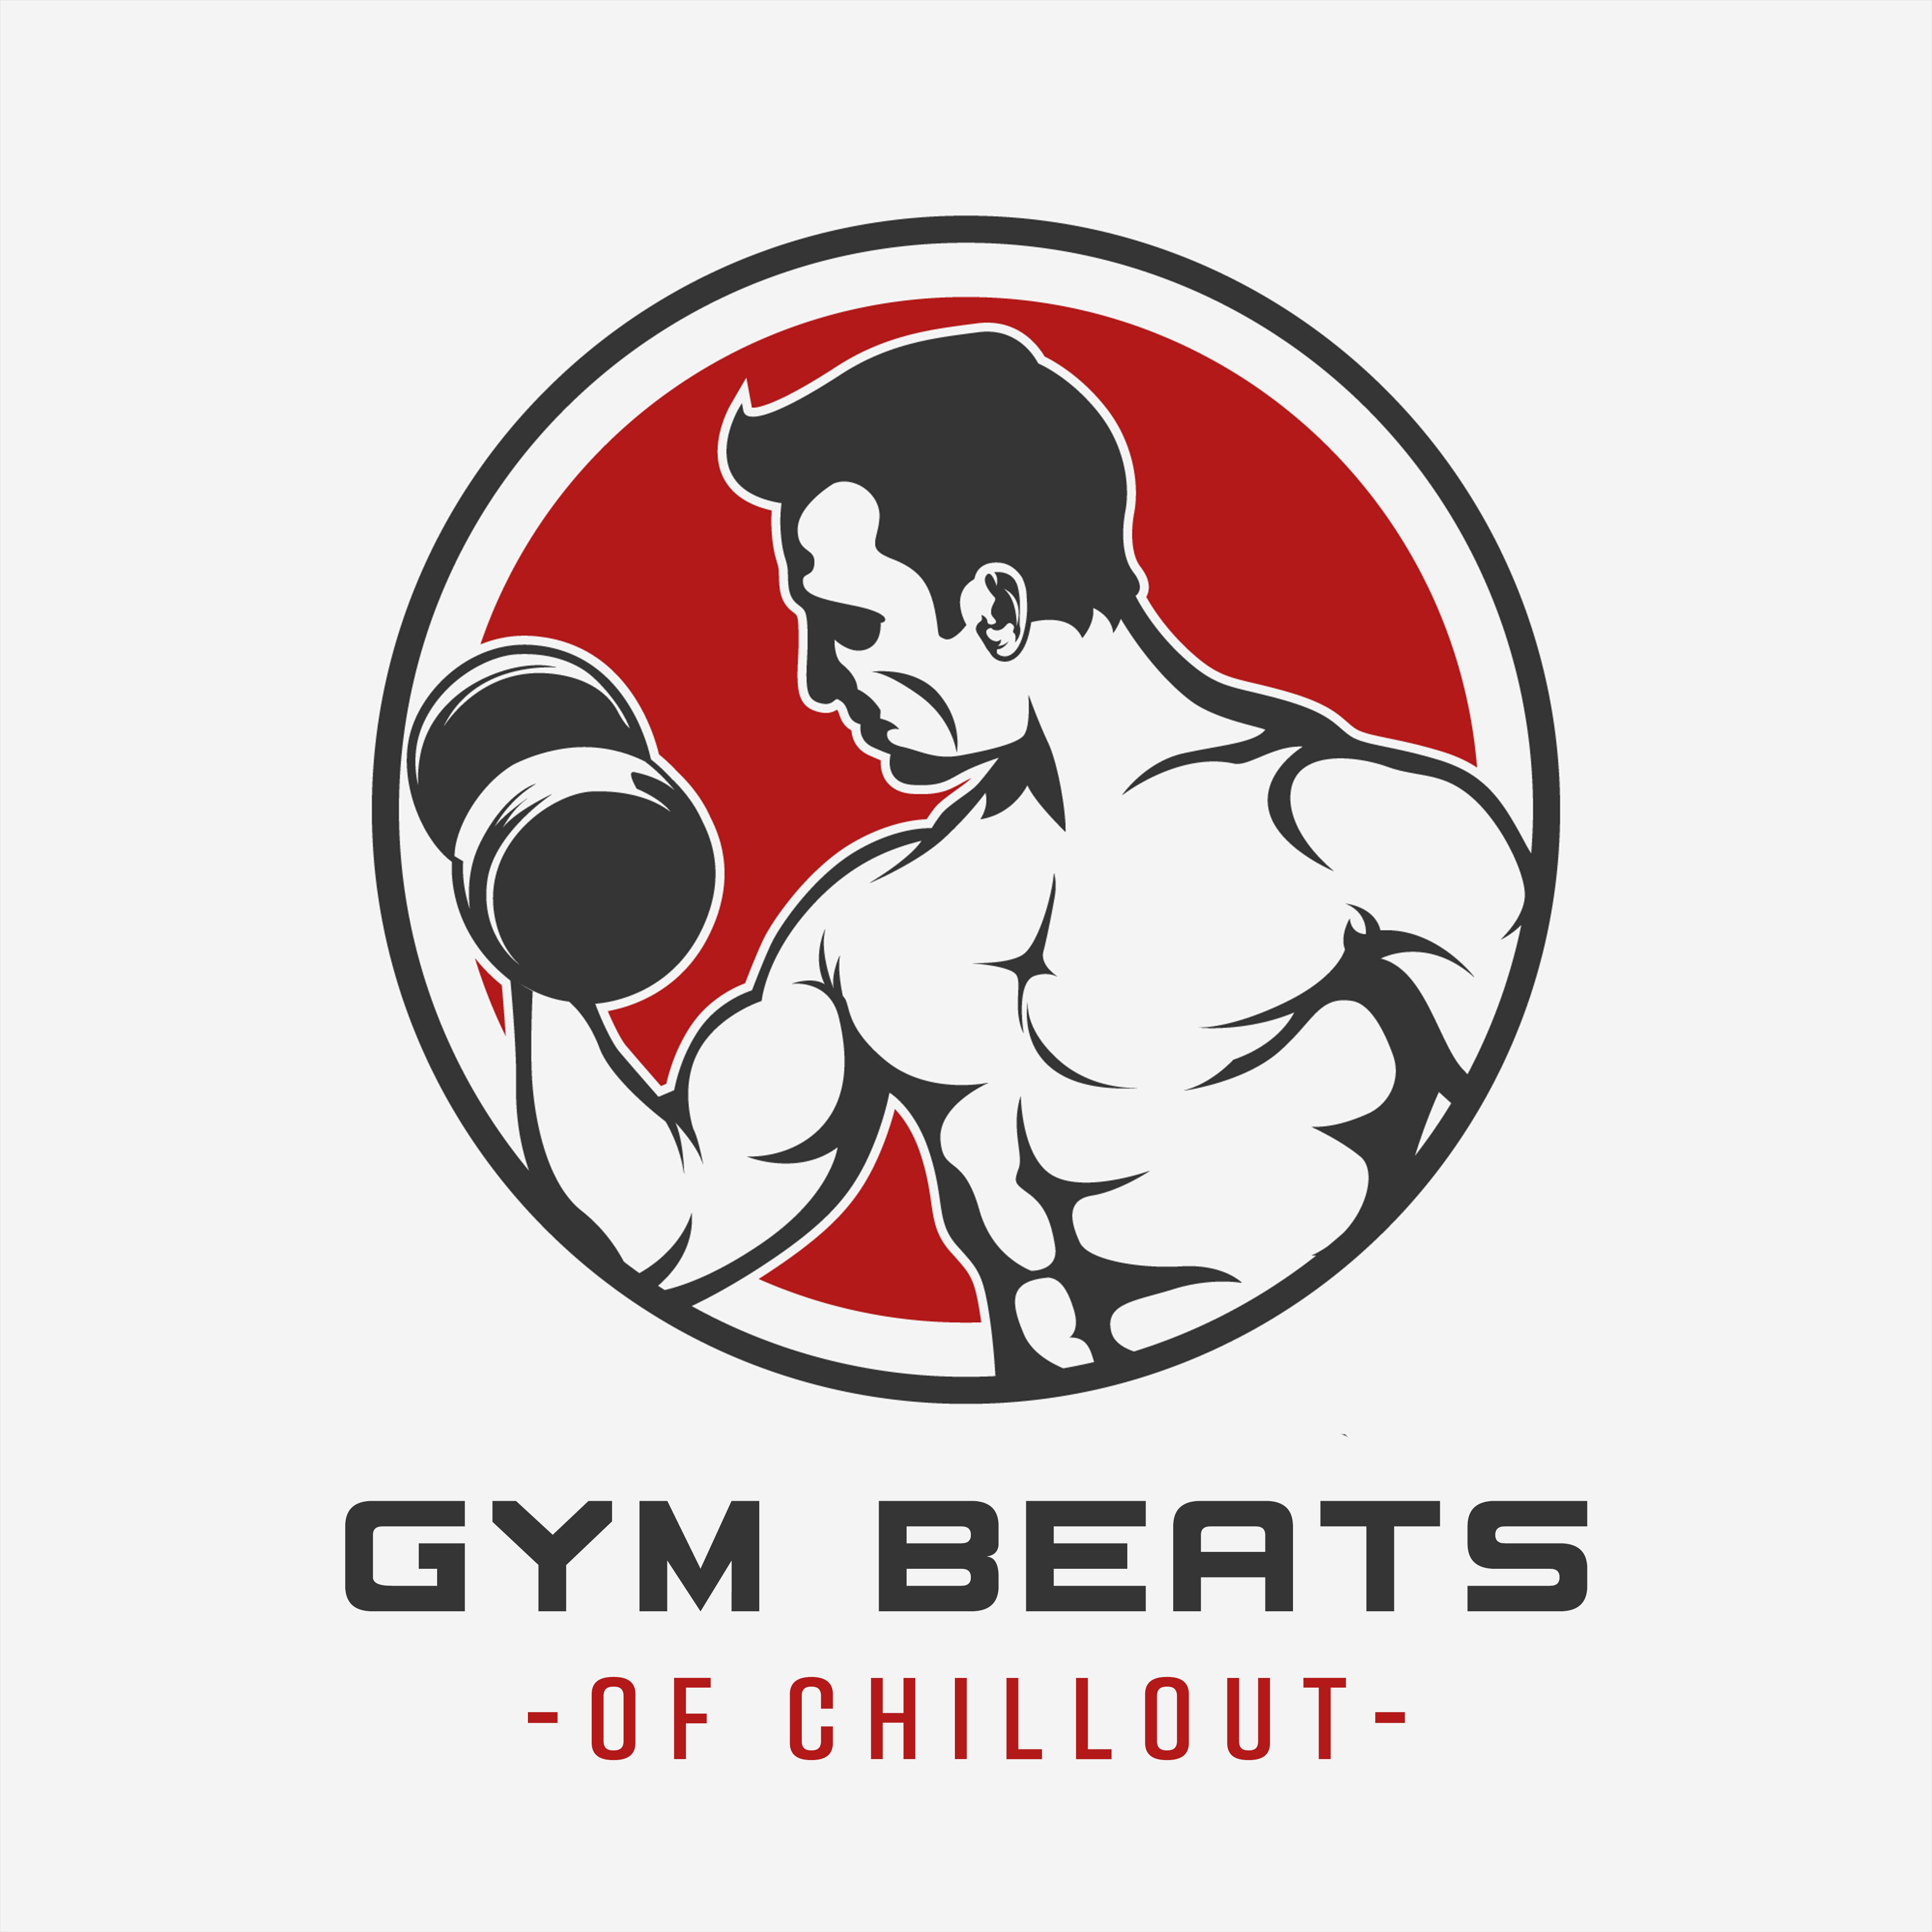 Gym Beats of Chillout